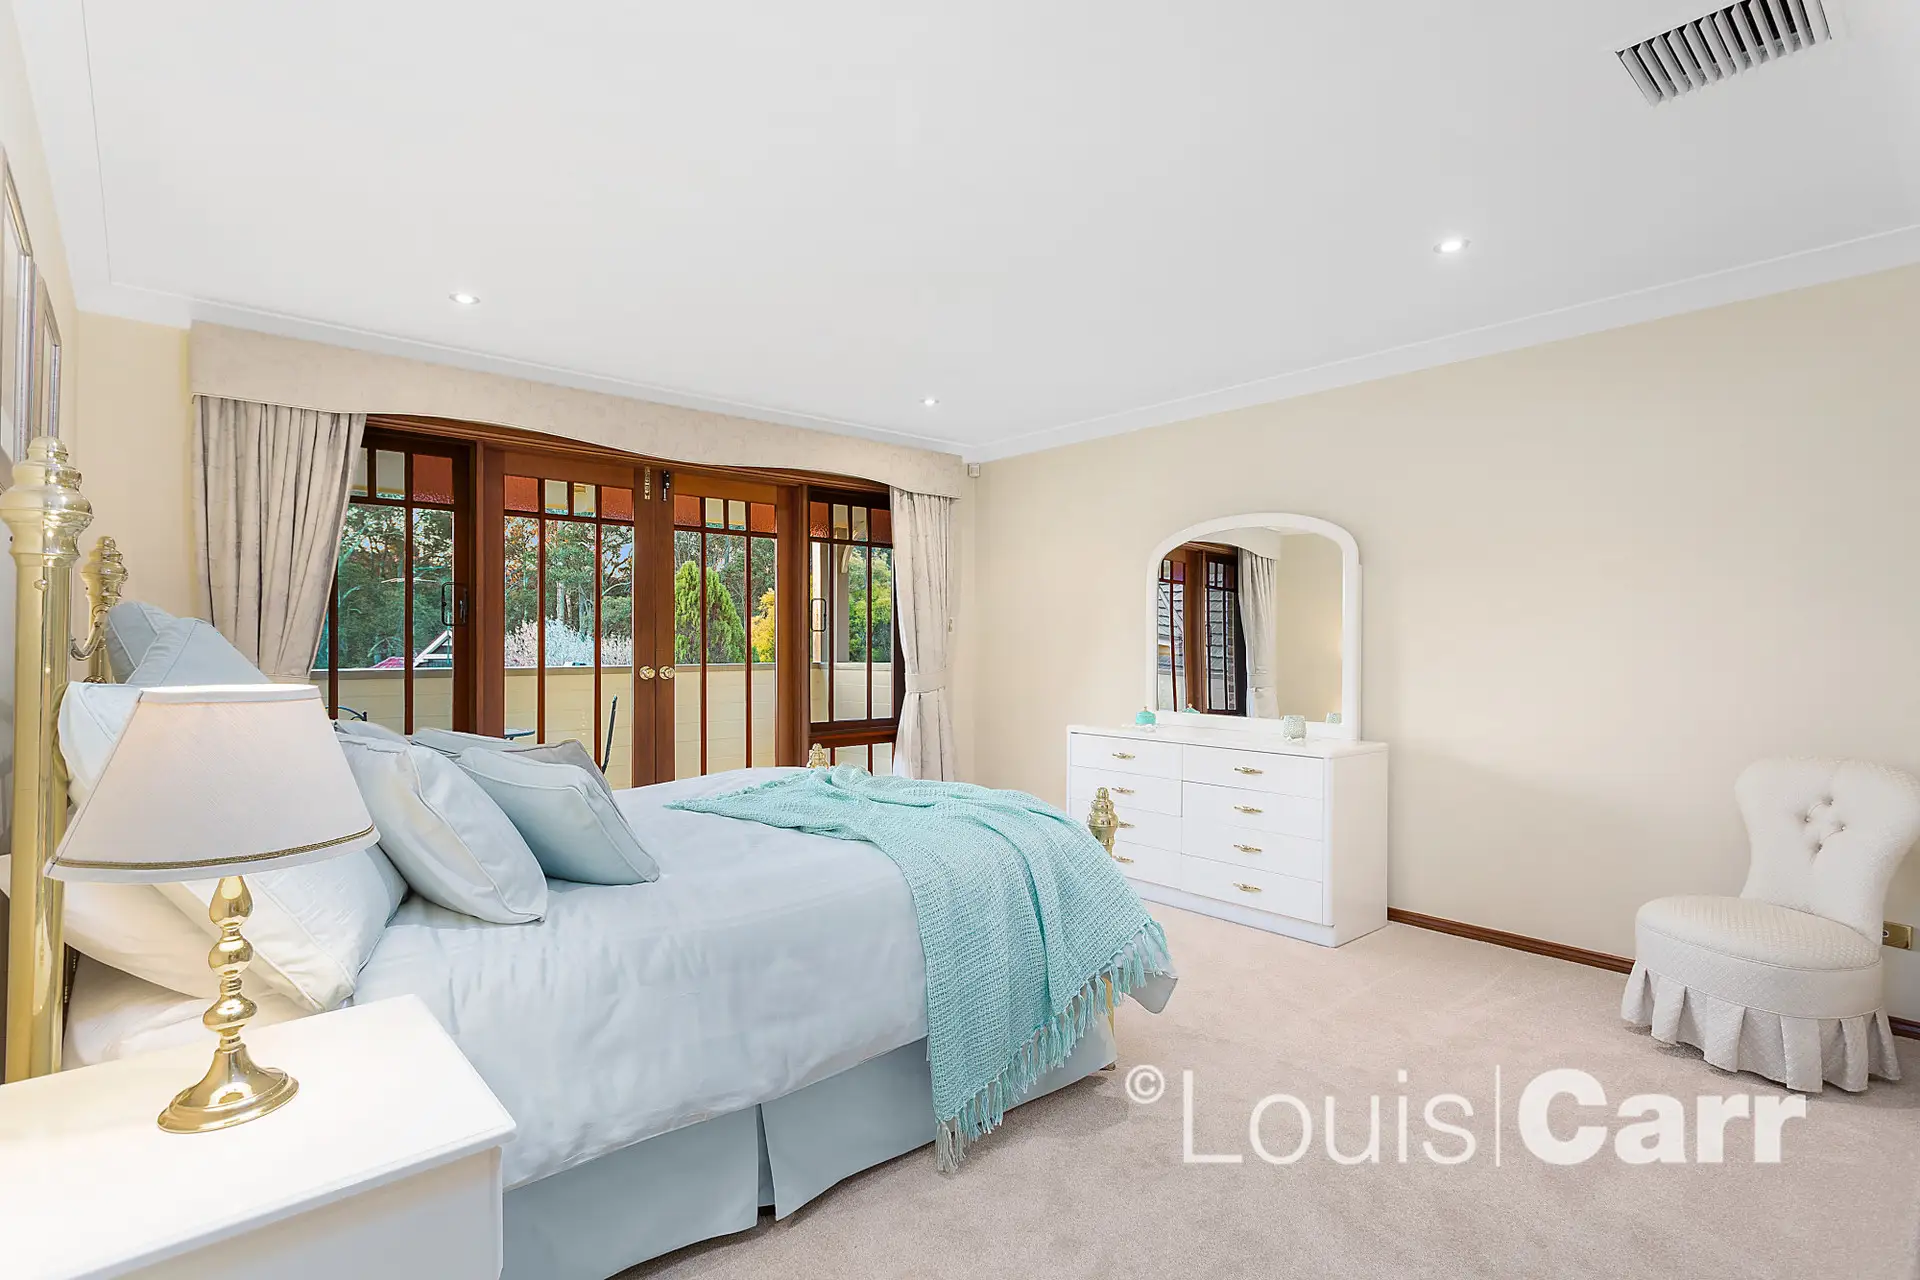 Photo #9: 7 Rosella Way, West Pennant Hills - Sold by Louis Carr Real Estate